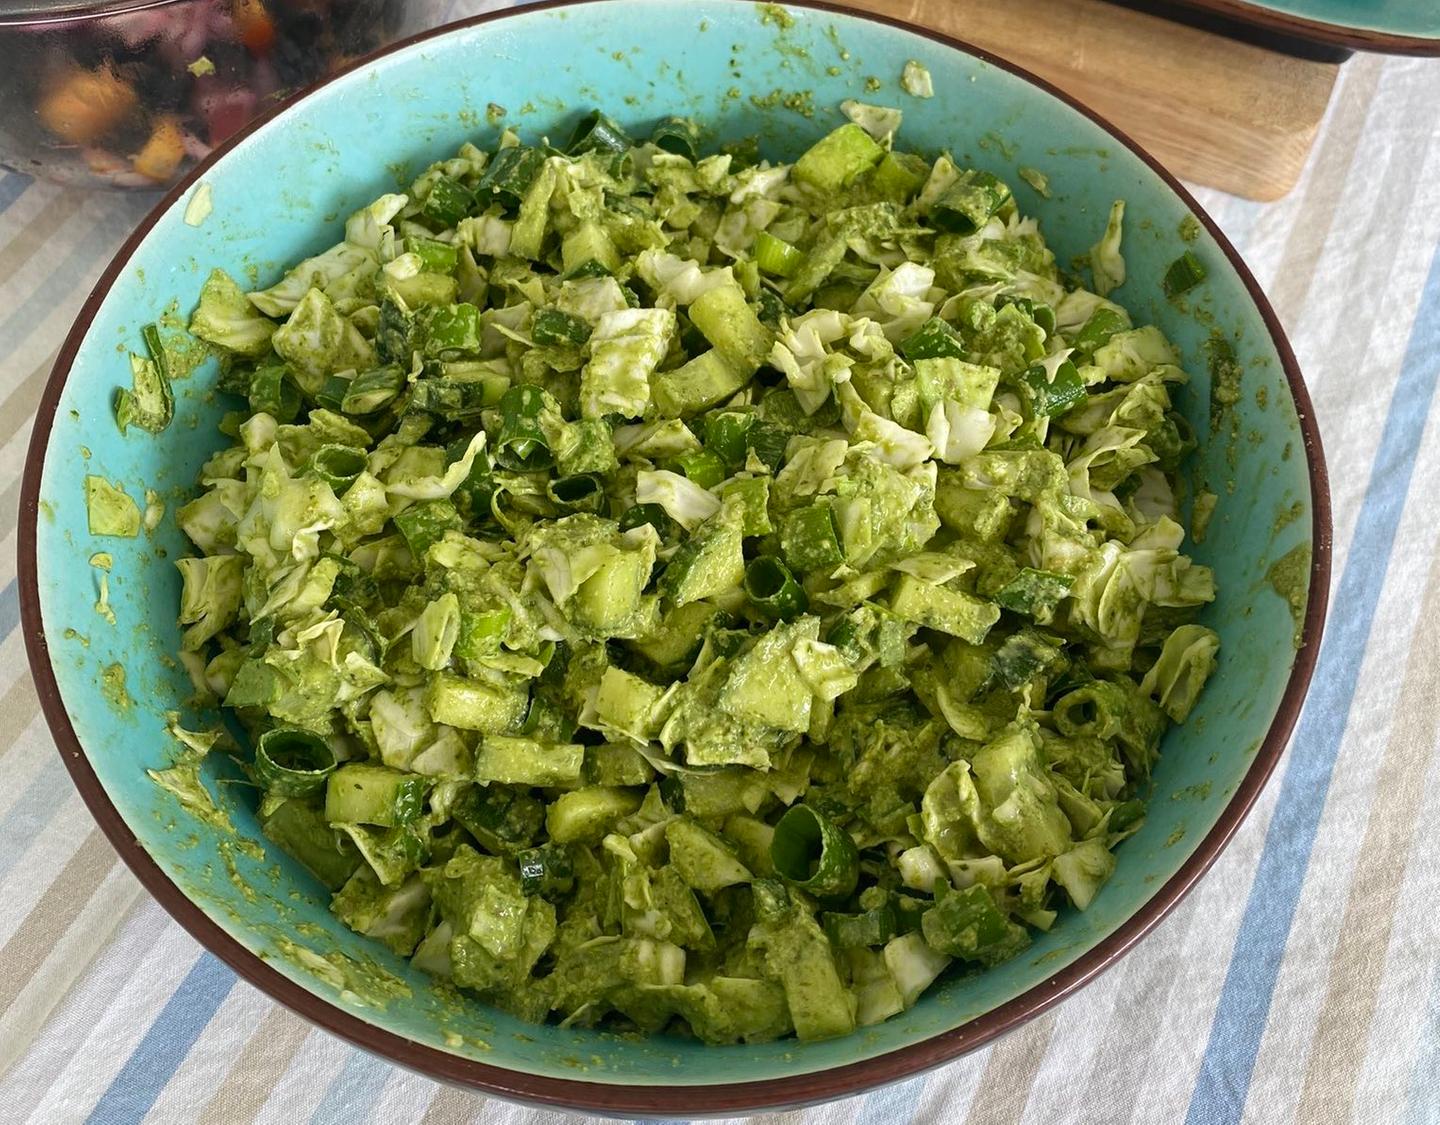 How to Make the Green Goddess Salad From TikTok